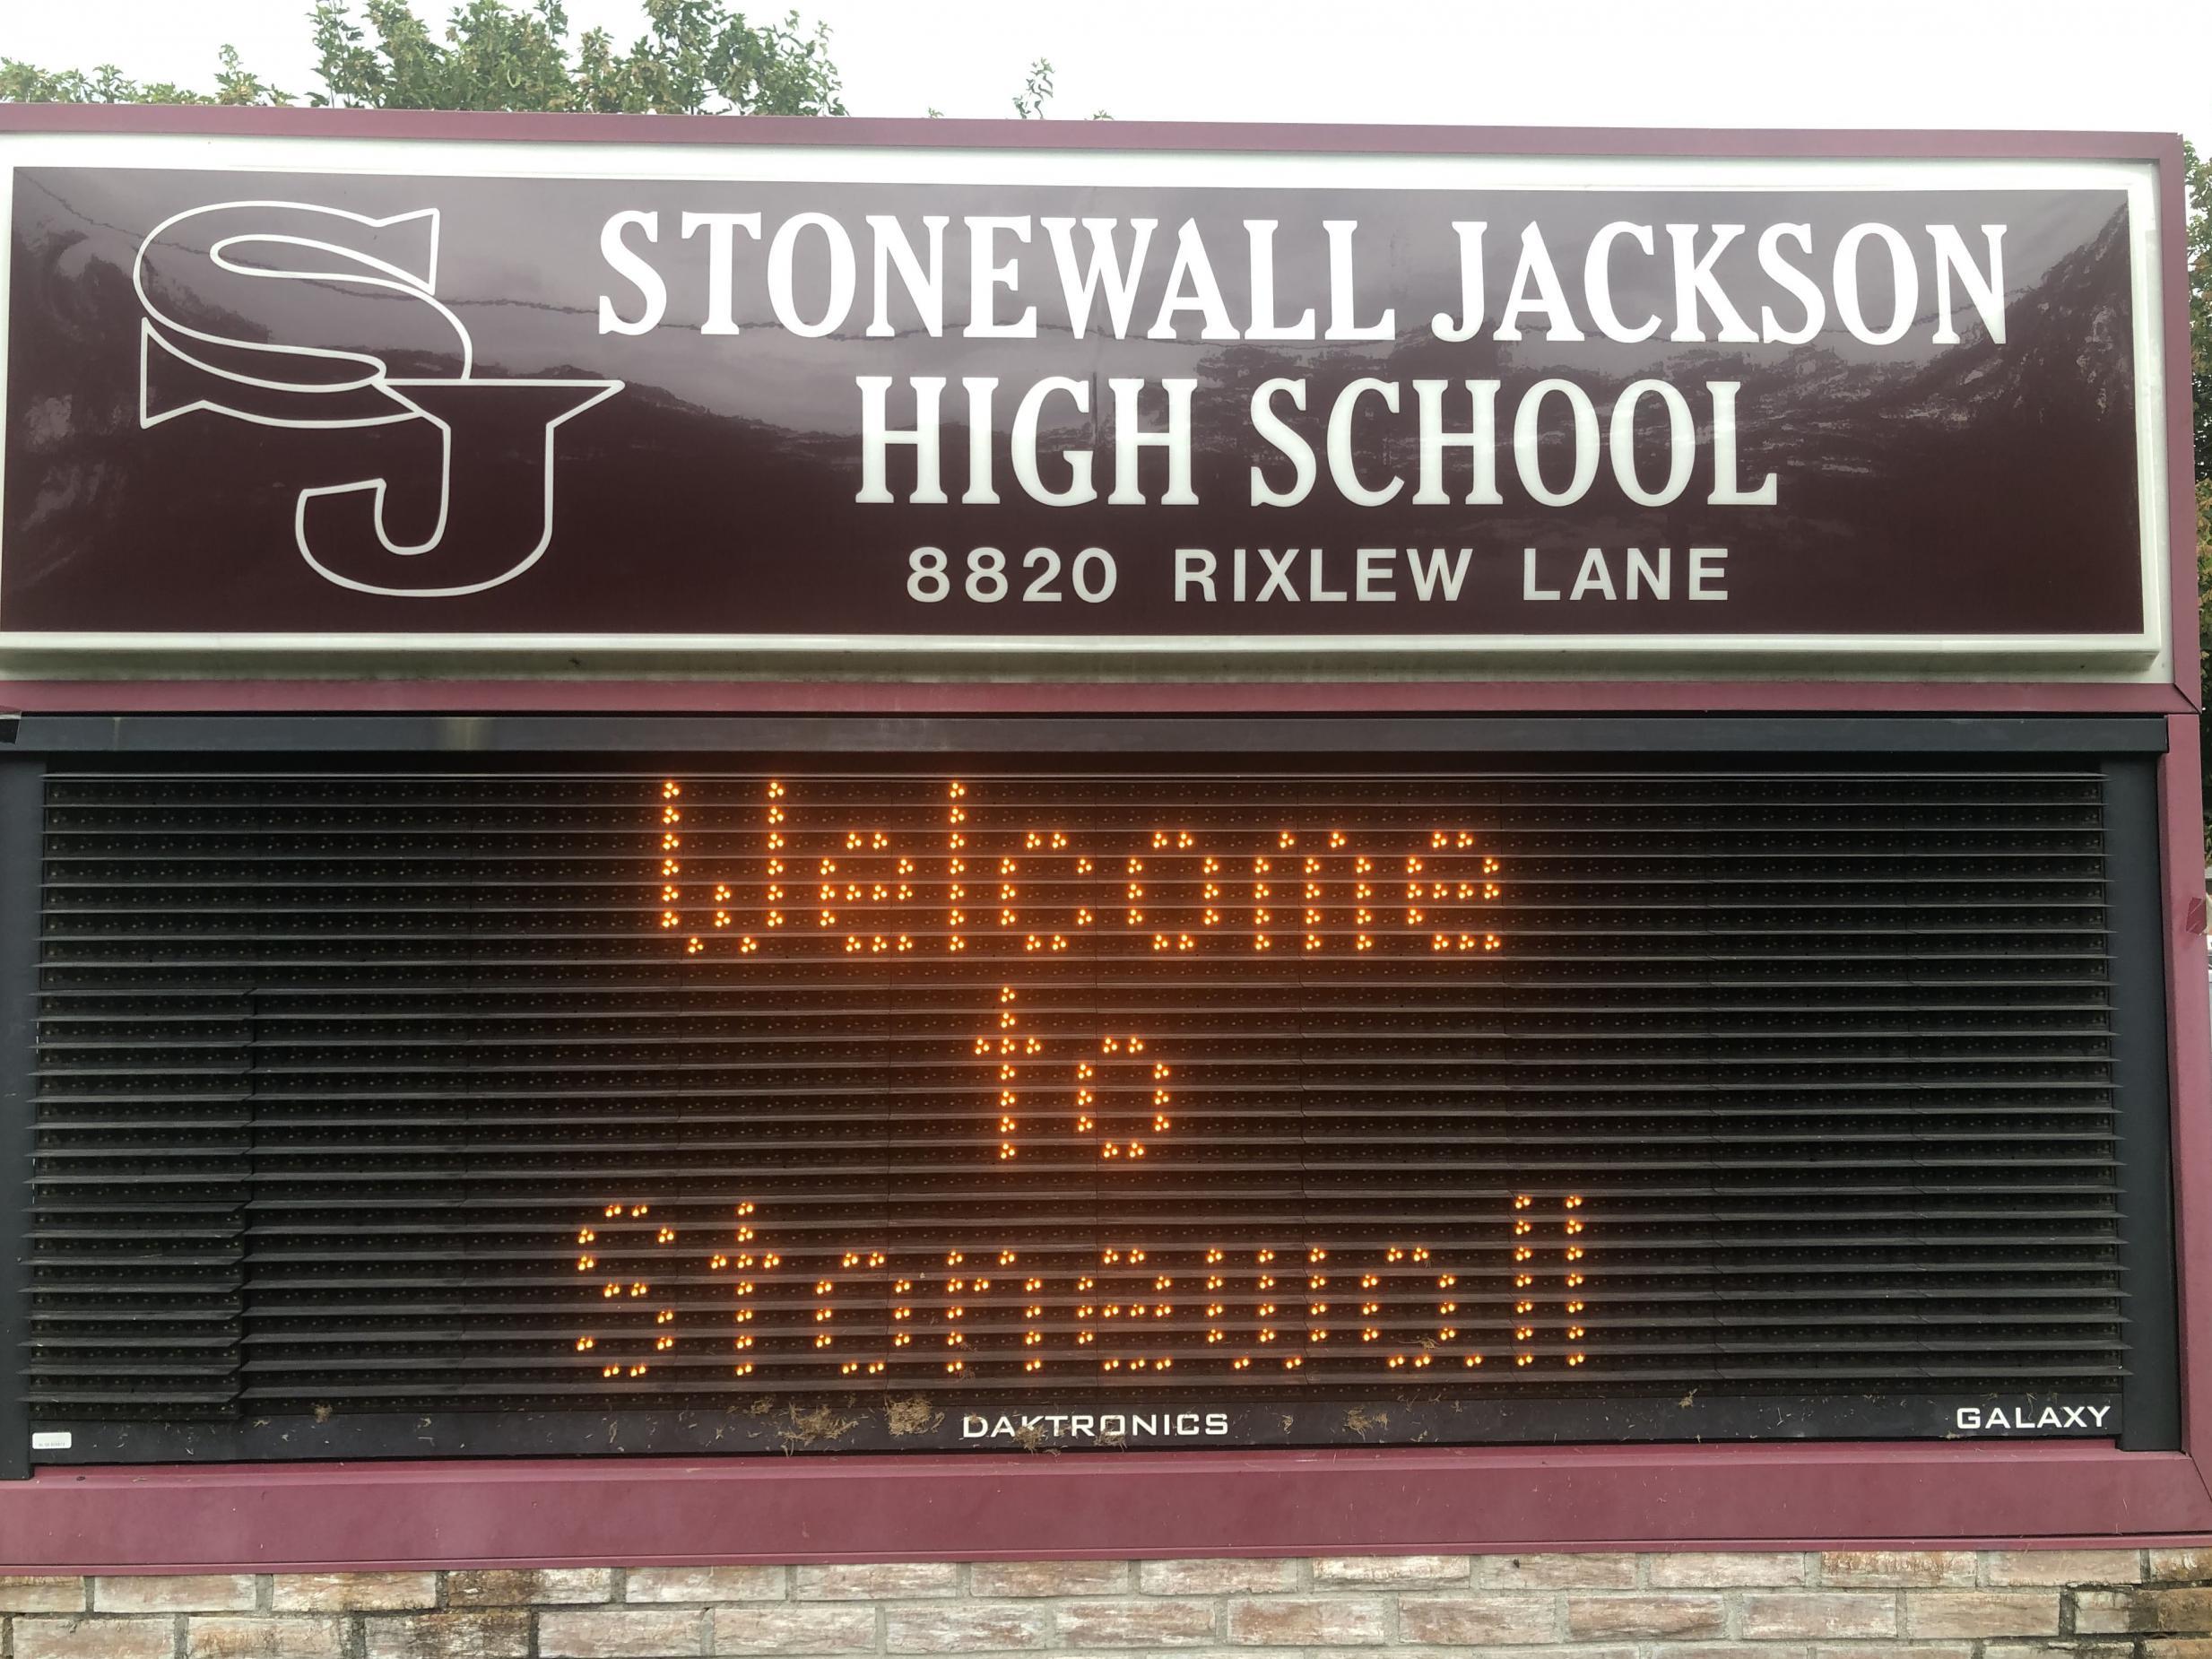 Stonewall Jackson High School is one of a number of schools across Virginia which are changing their names